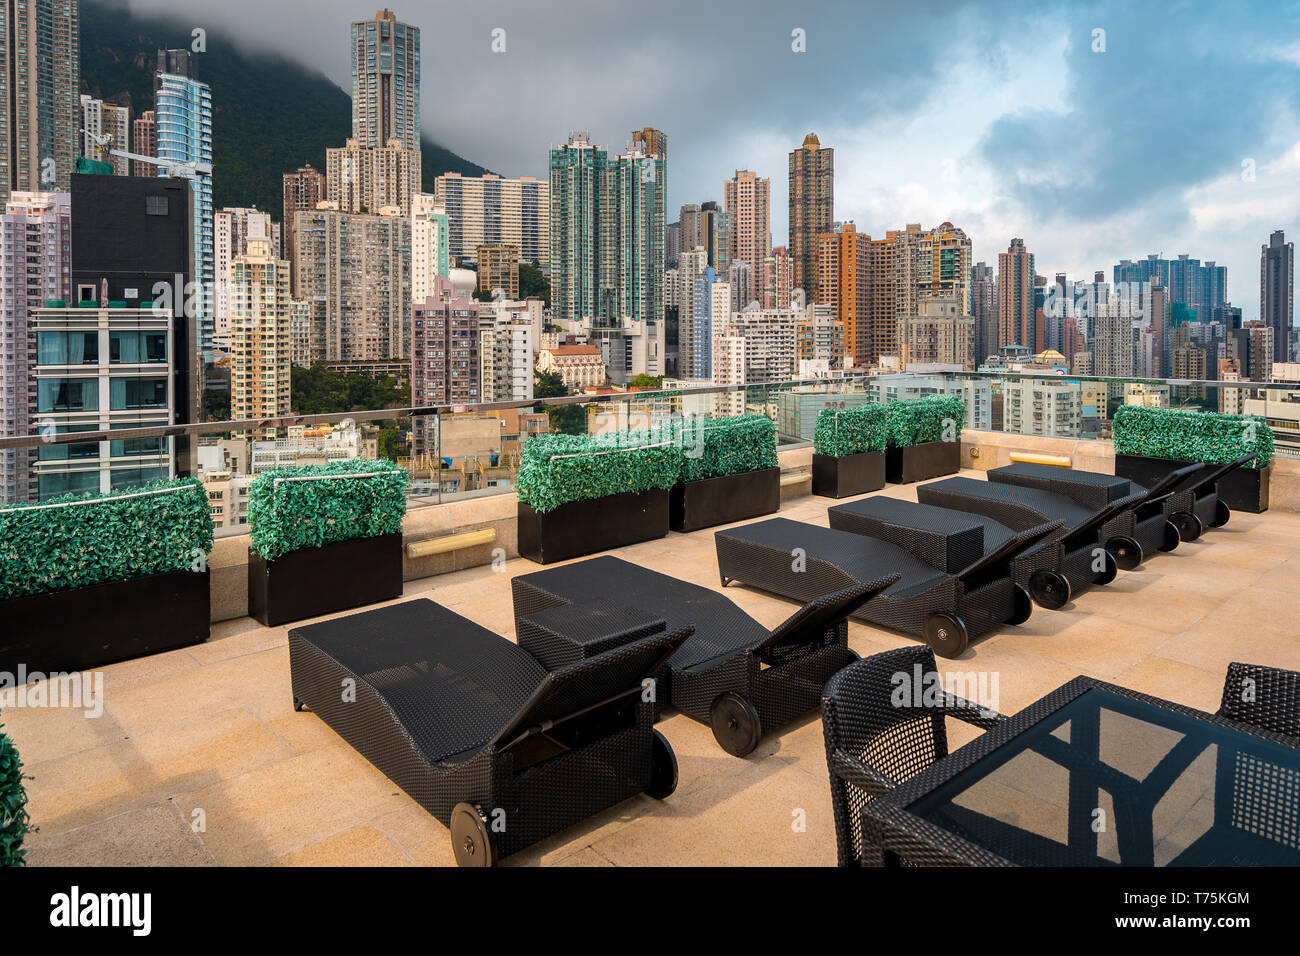 Hong Kong, China - City view from the roof top resting area Stock Photo